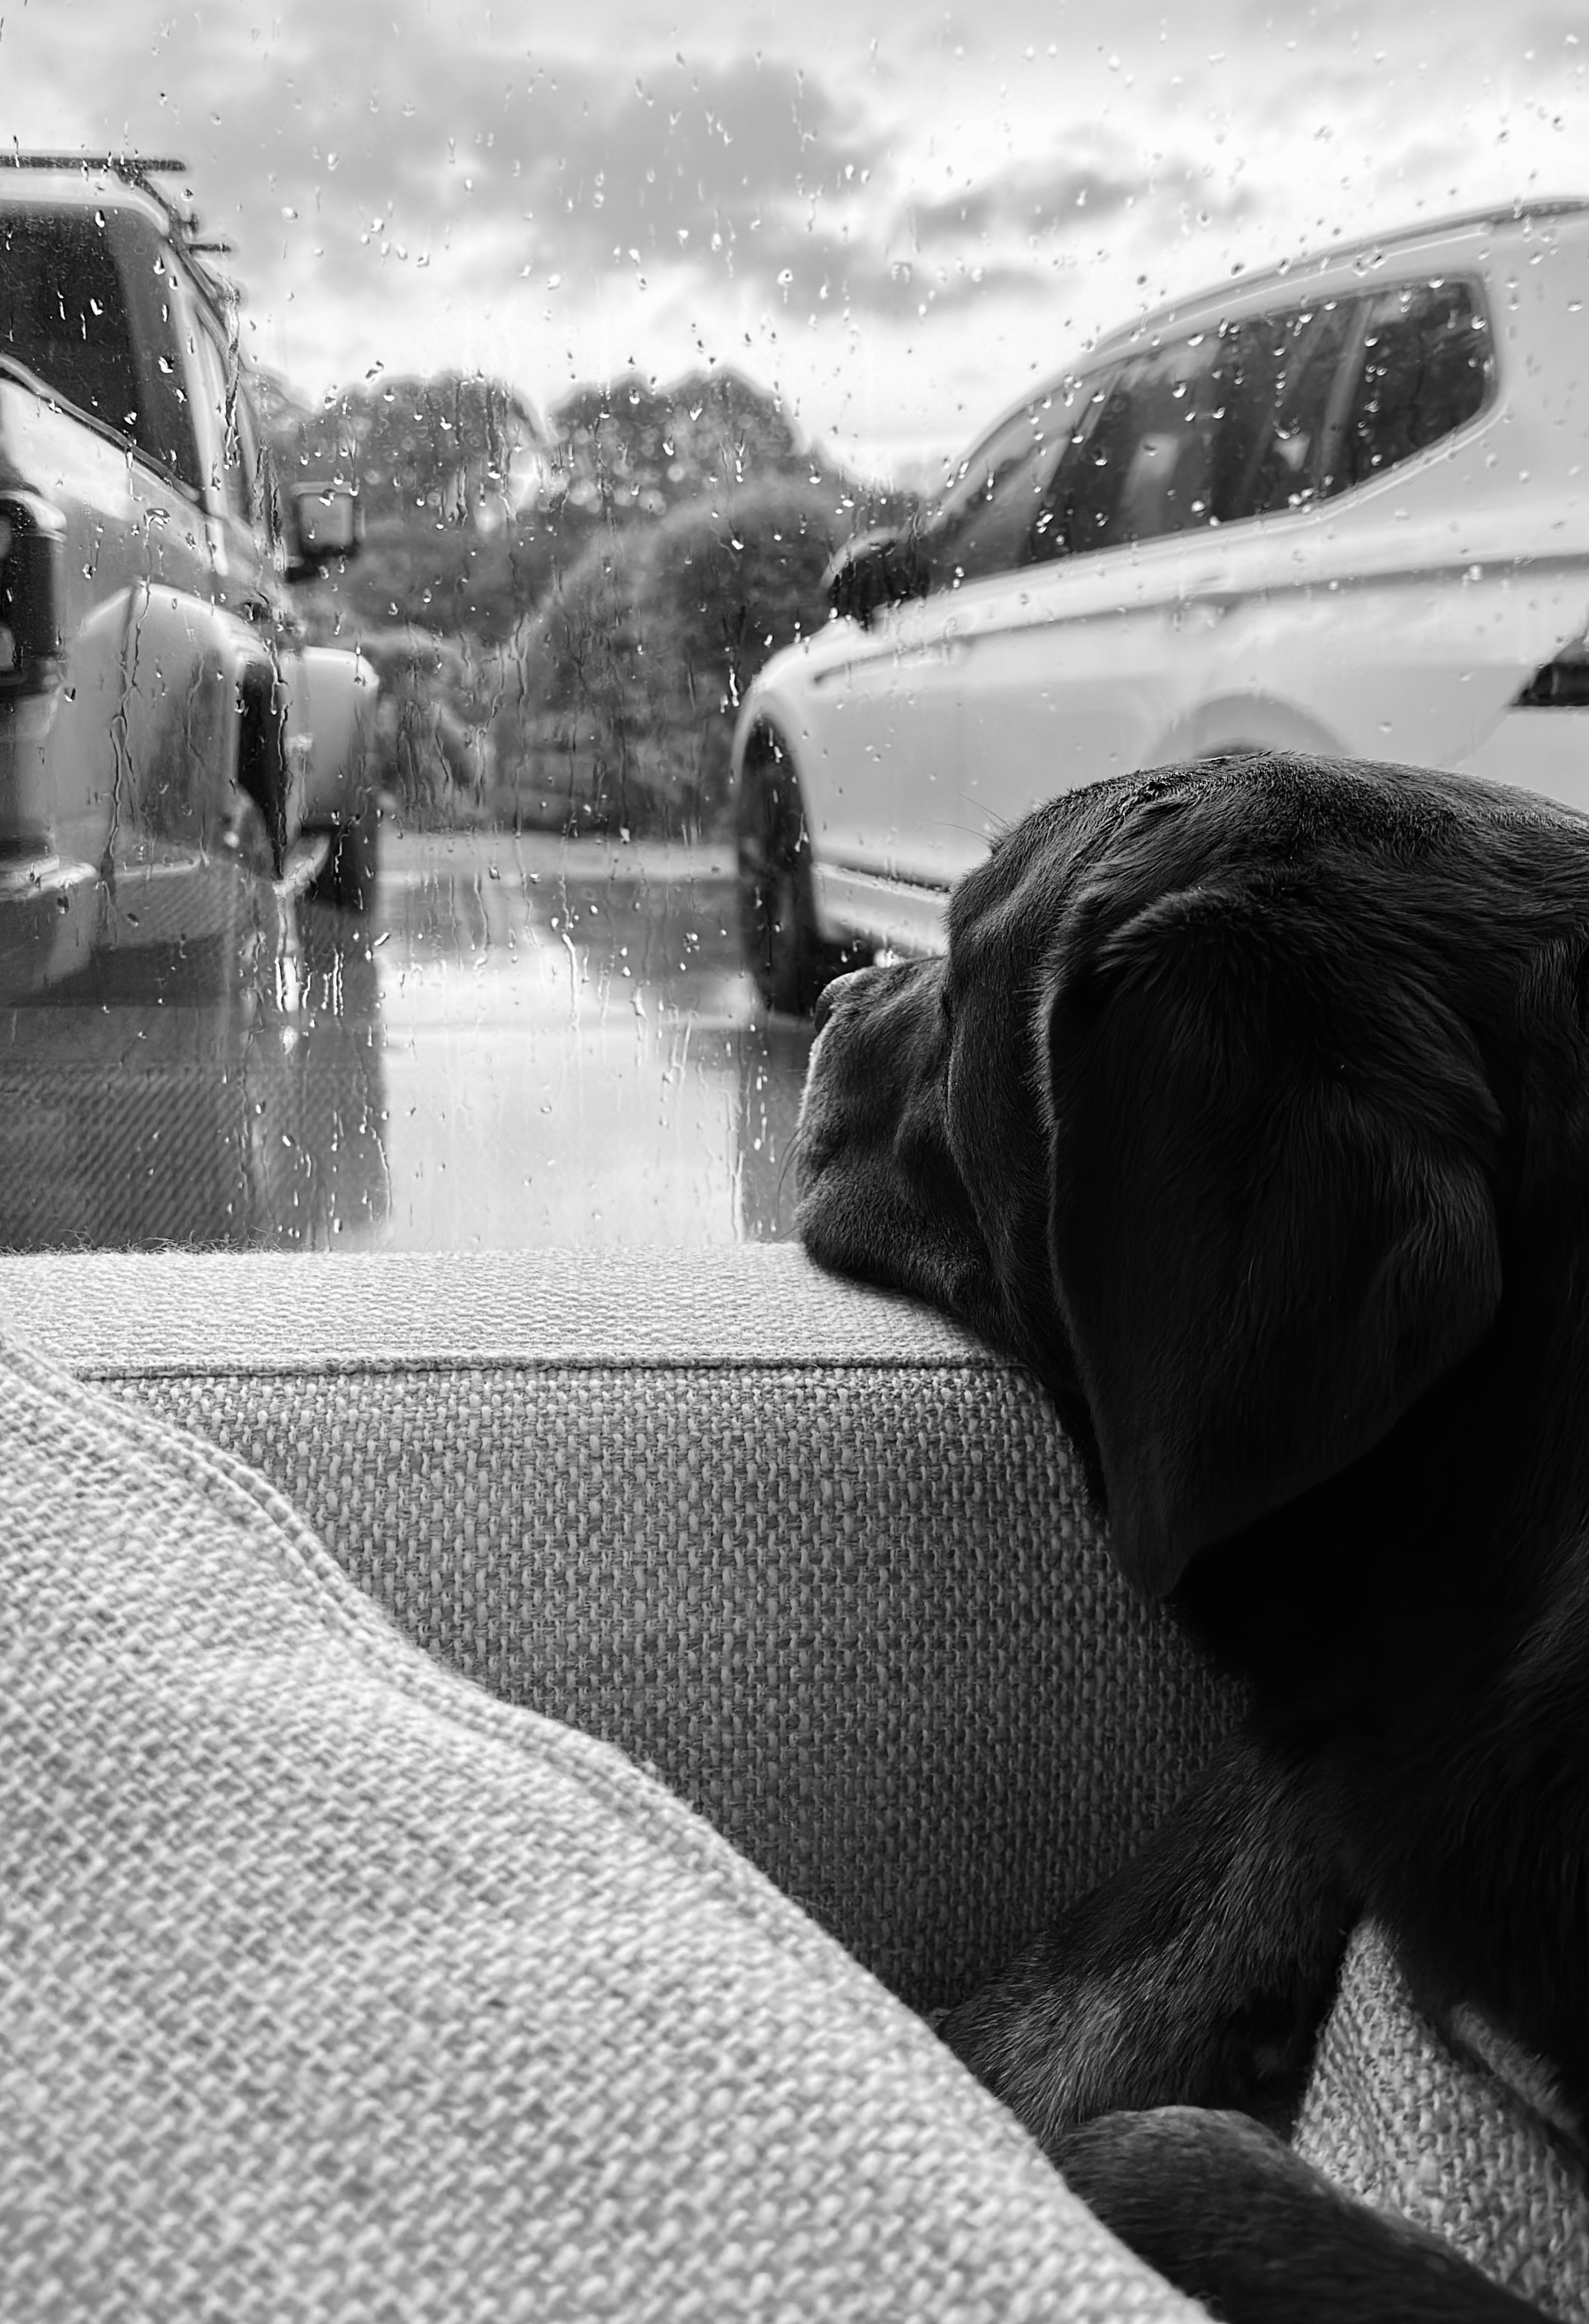 Dog on a sofa, staring out of a window onto a rainy driveway